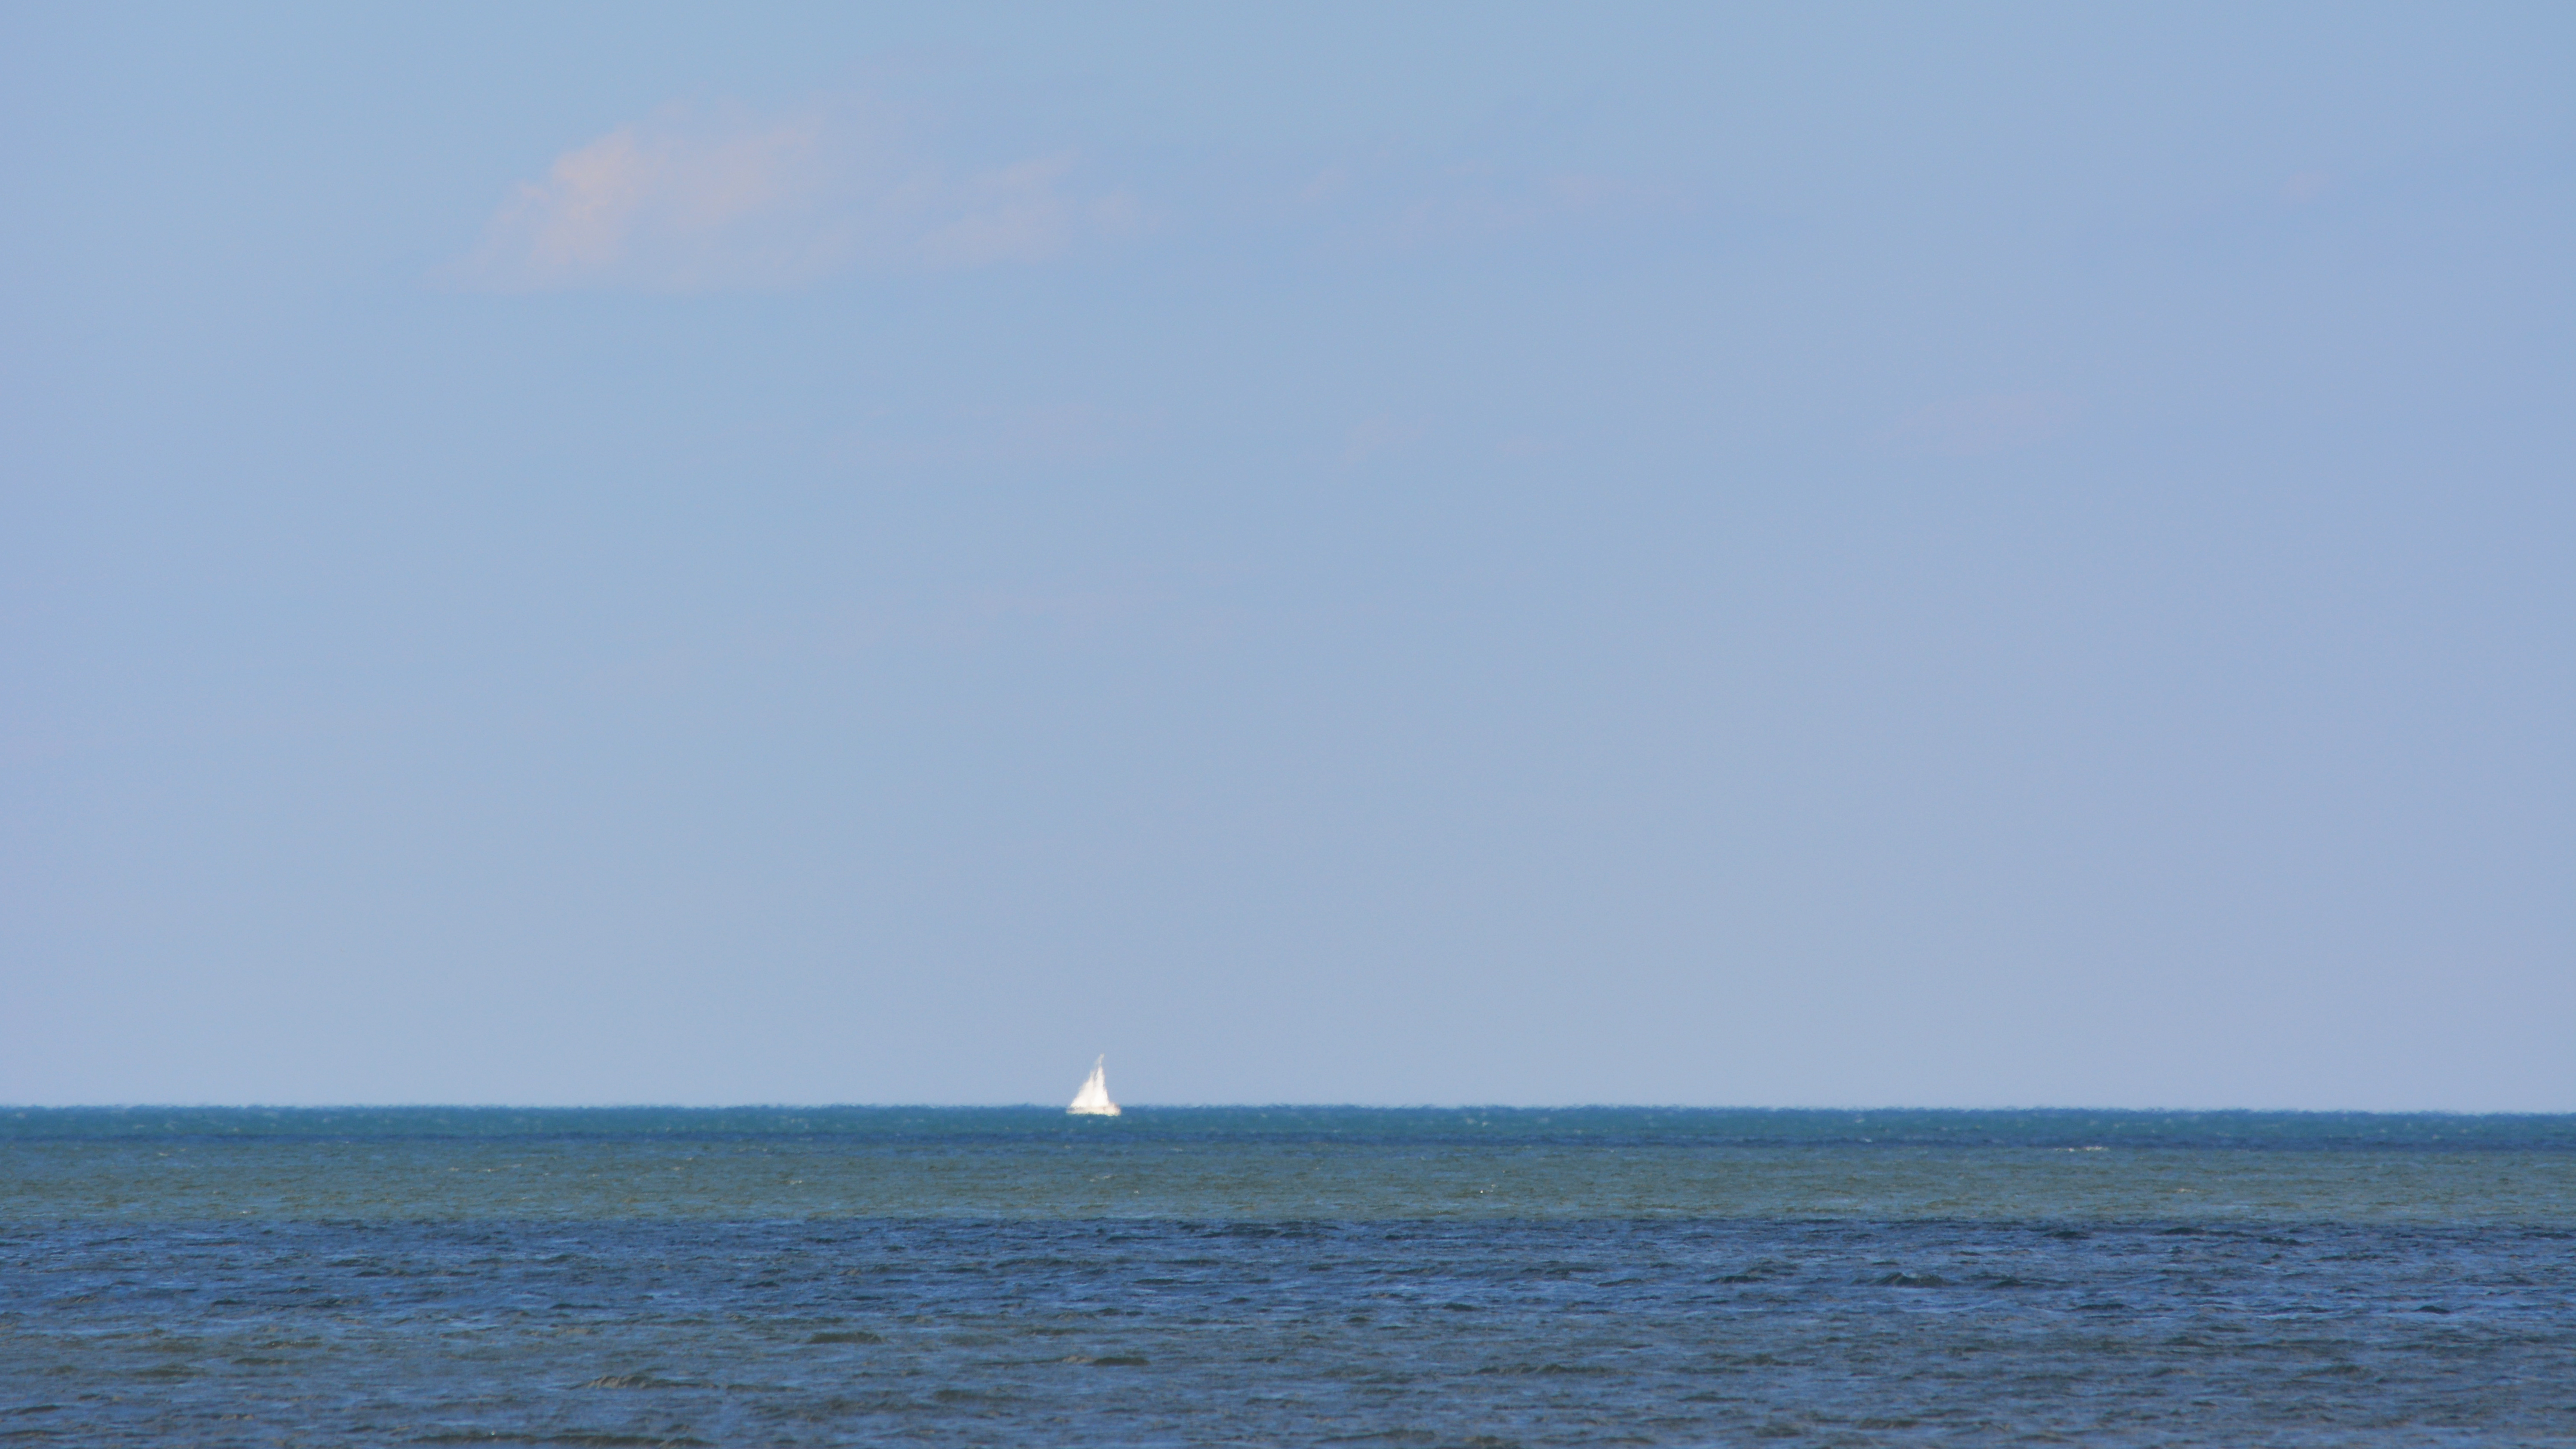 A sailboat in the distance